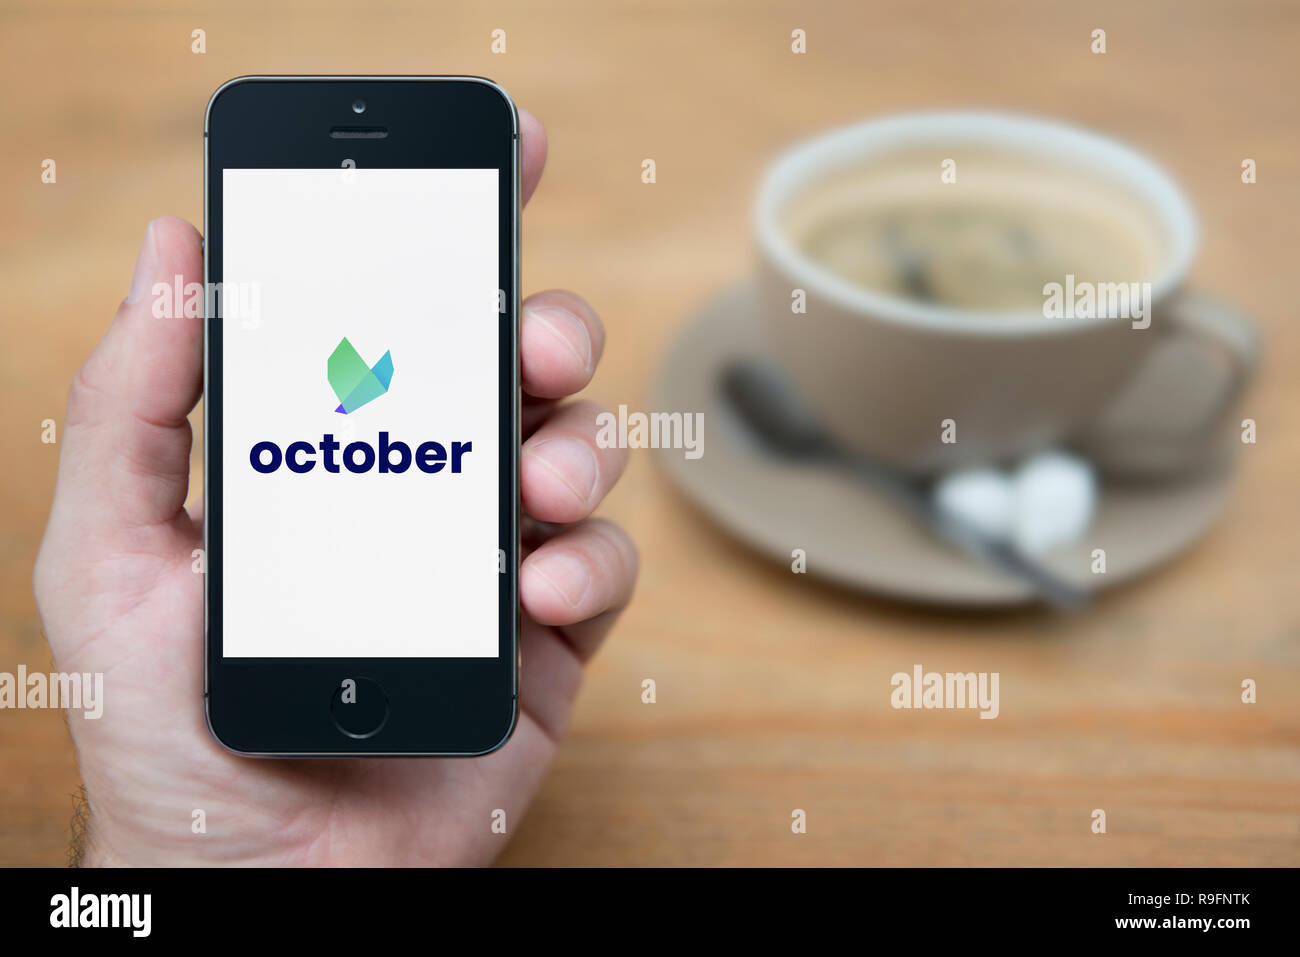 A man looks at his iPhone which displays the October logo (Editorial use only). Stock Photo